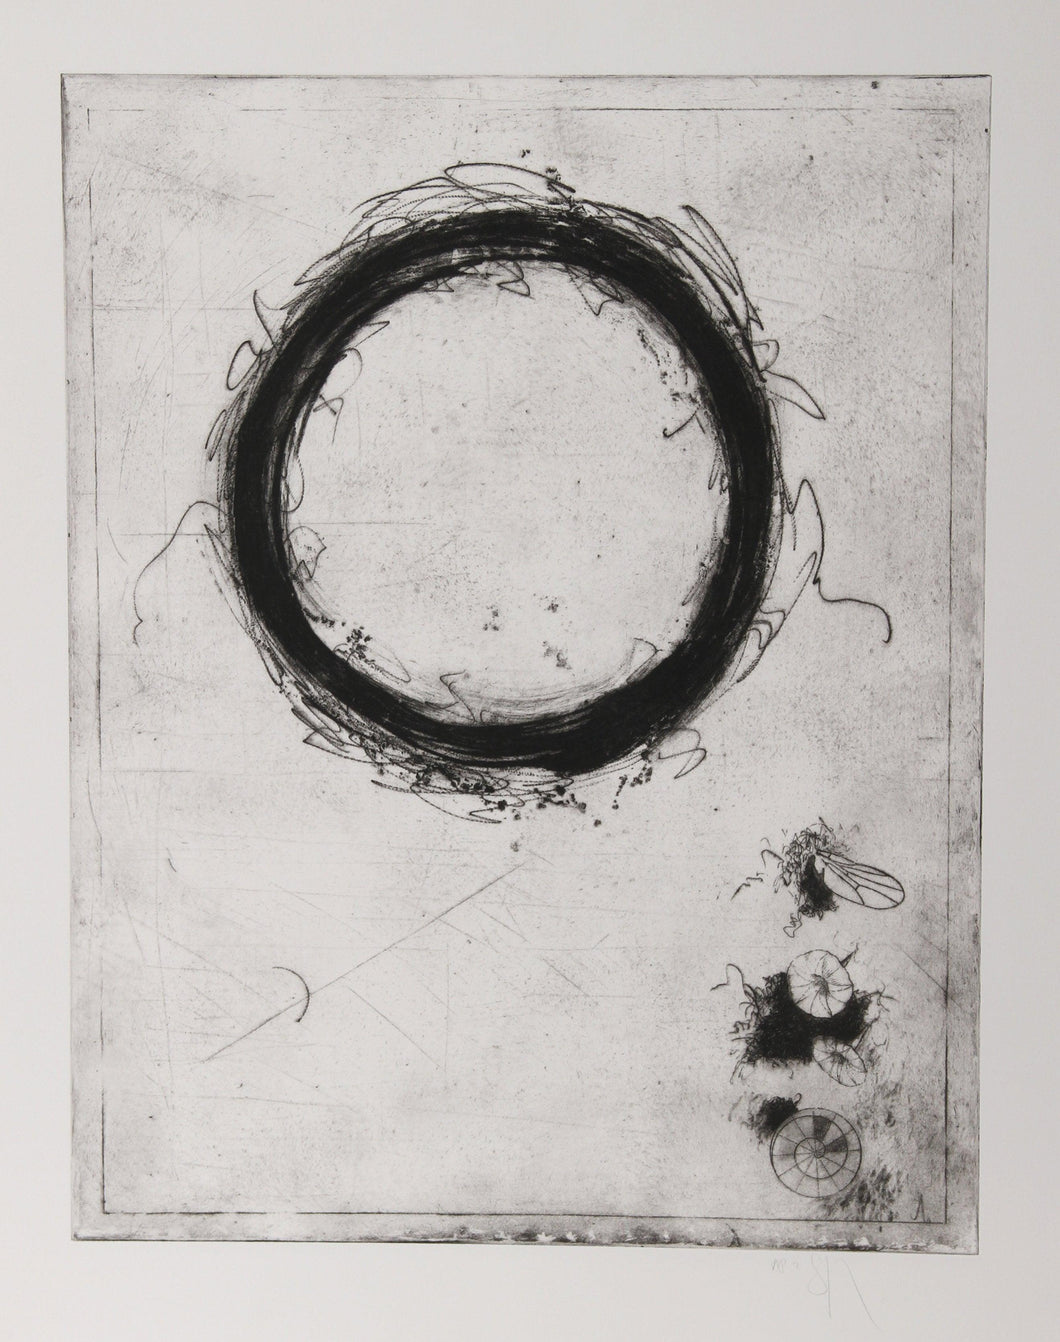 Untitled - O Etching | Donald Saff,{{product.type}}